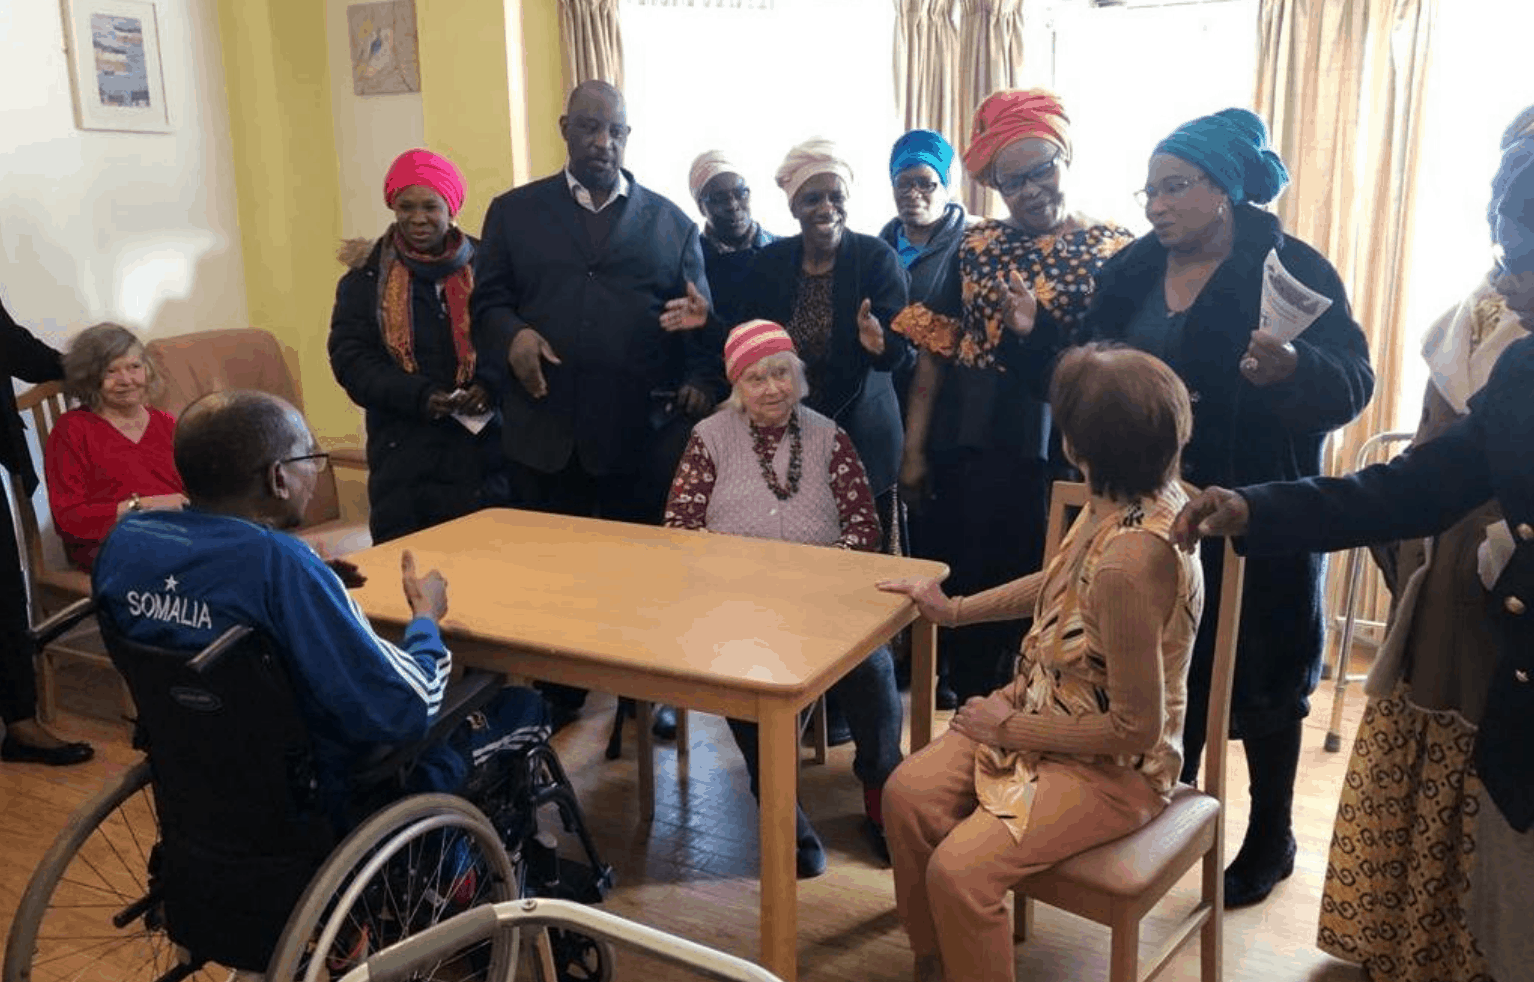 Church members visiting a care home